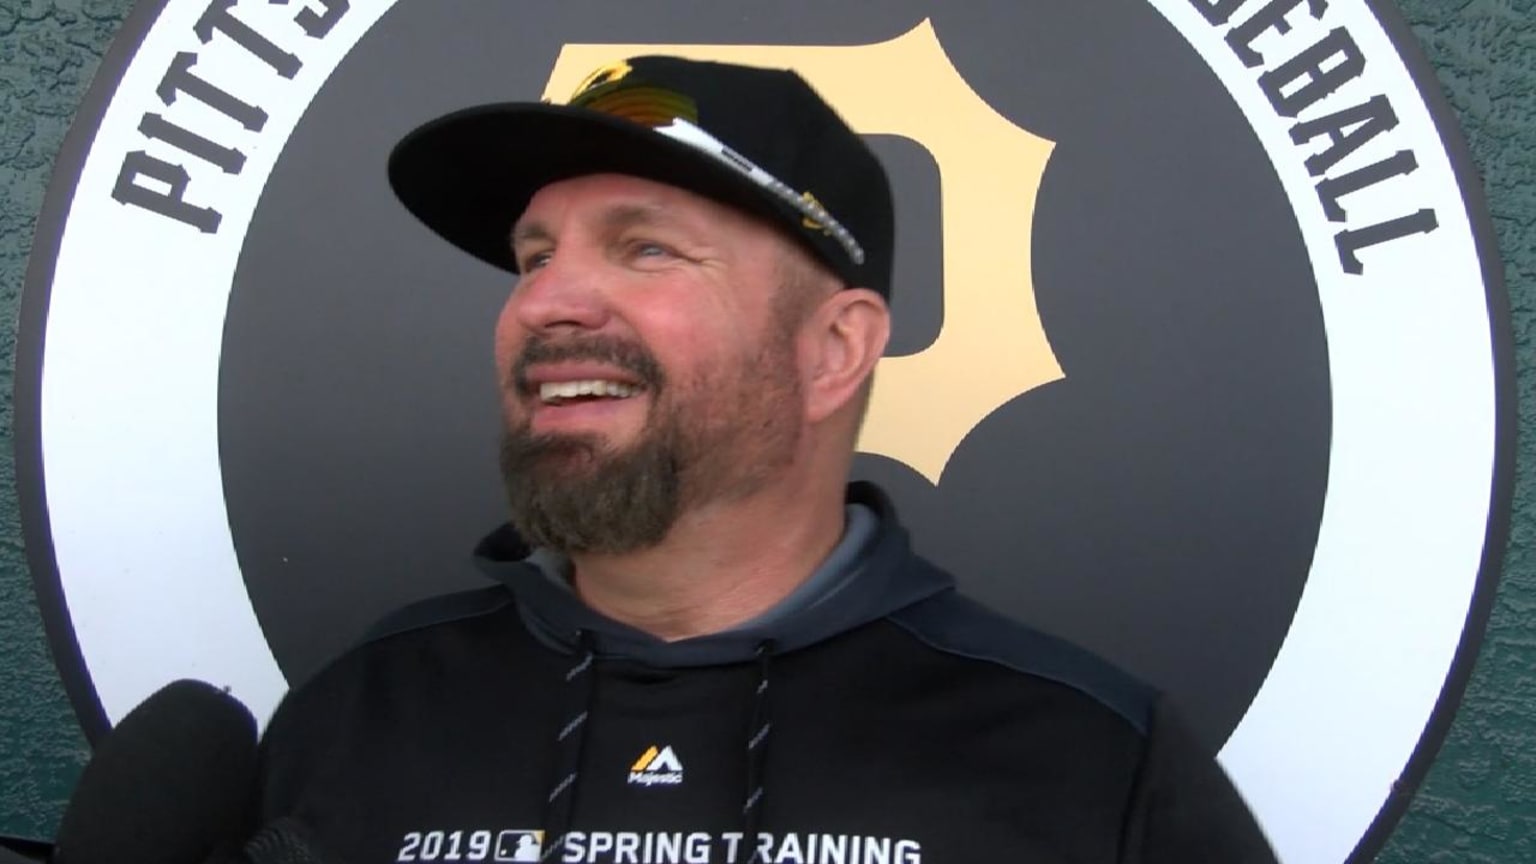 Garth Brooks plays ball with the San Diego Padres at spring